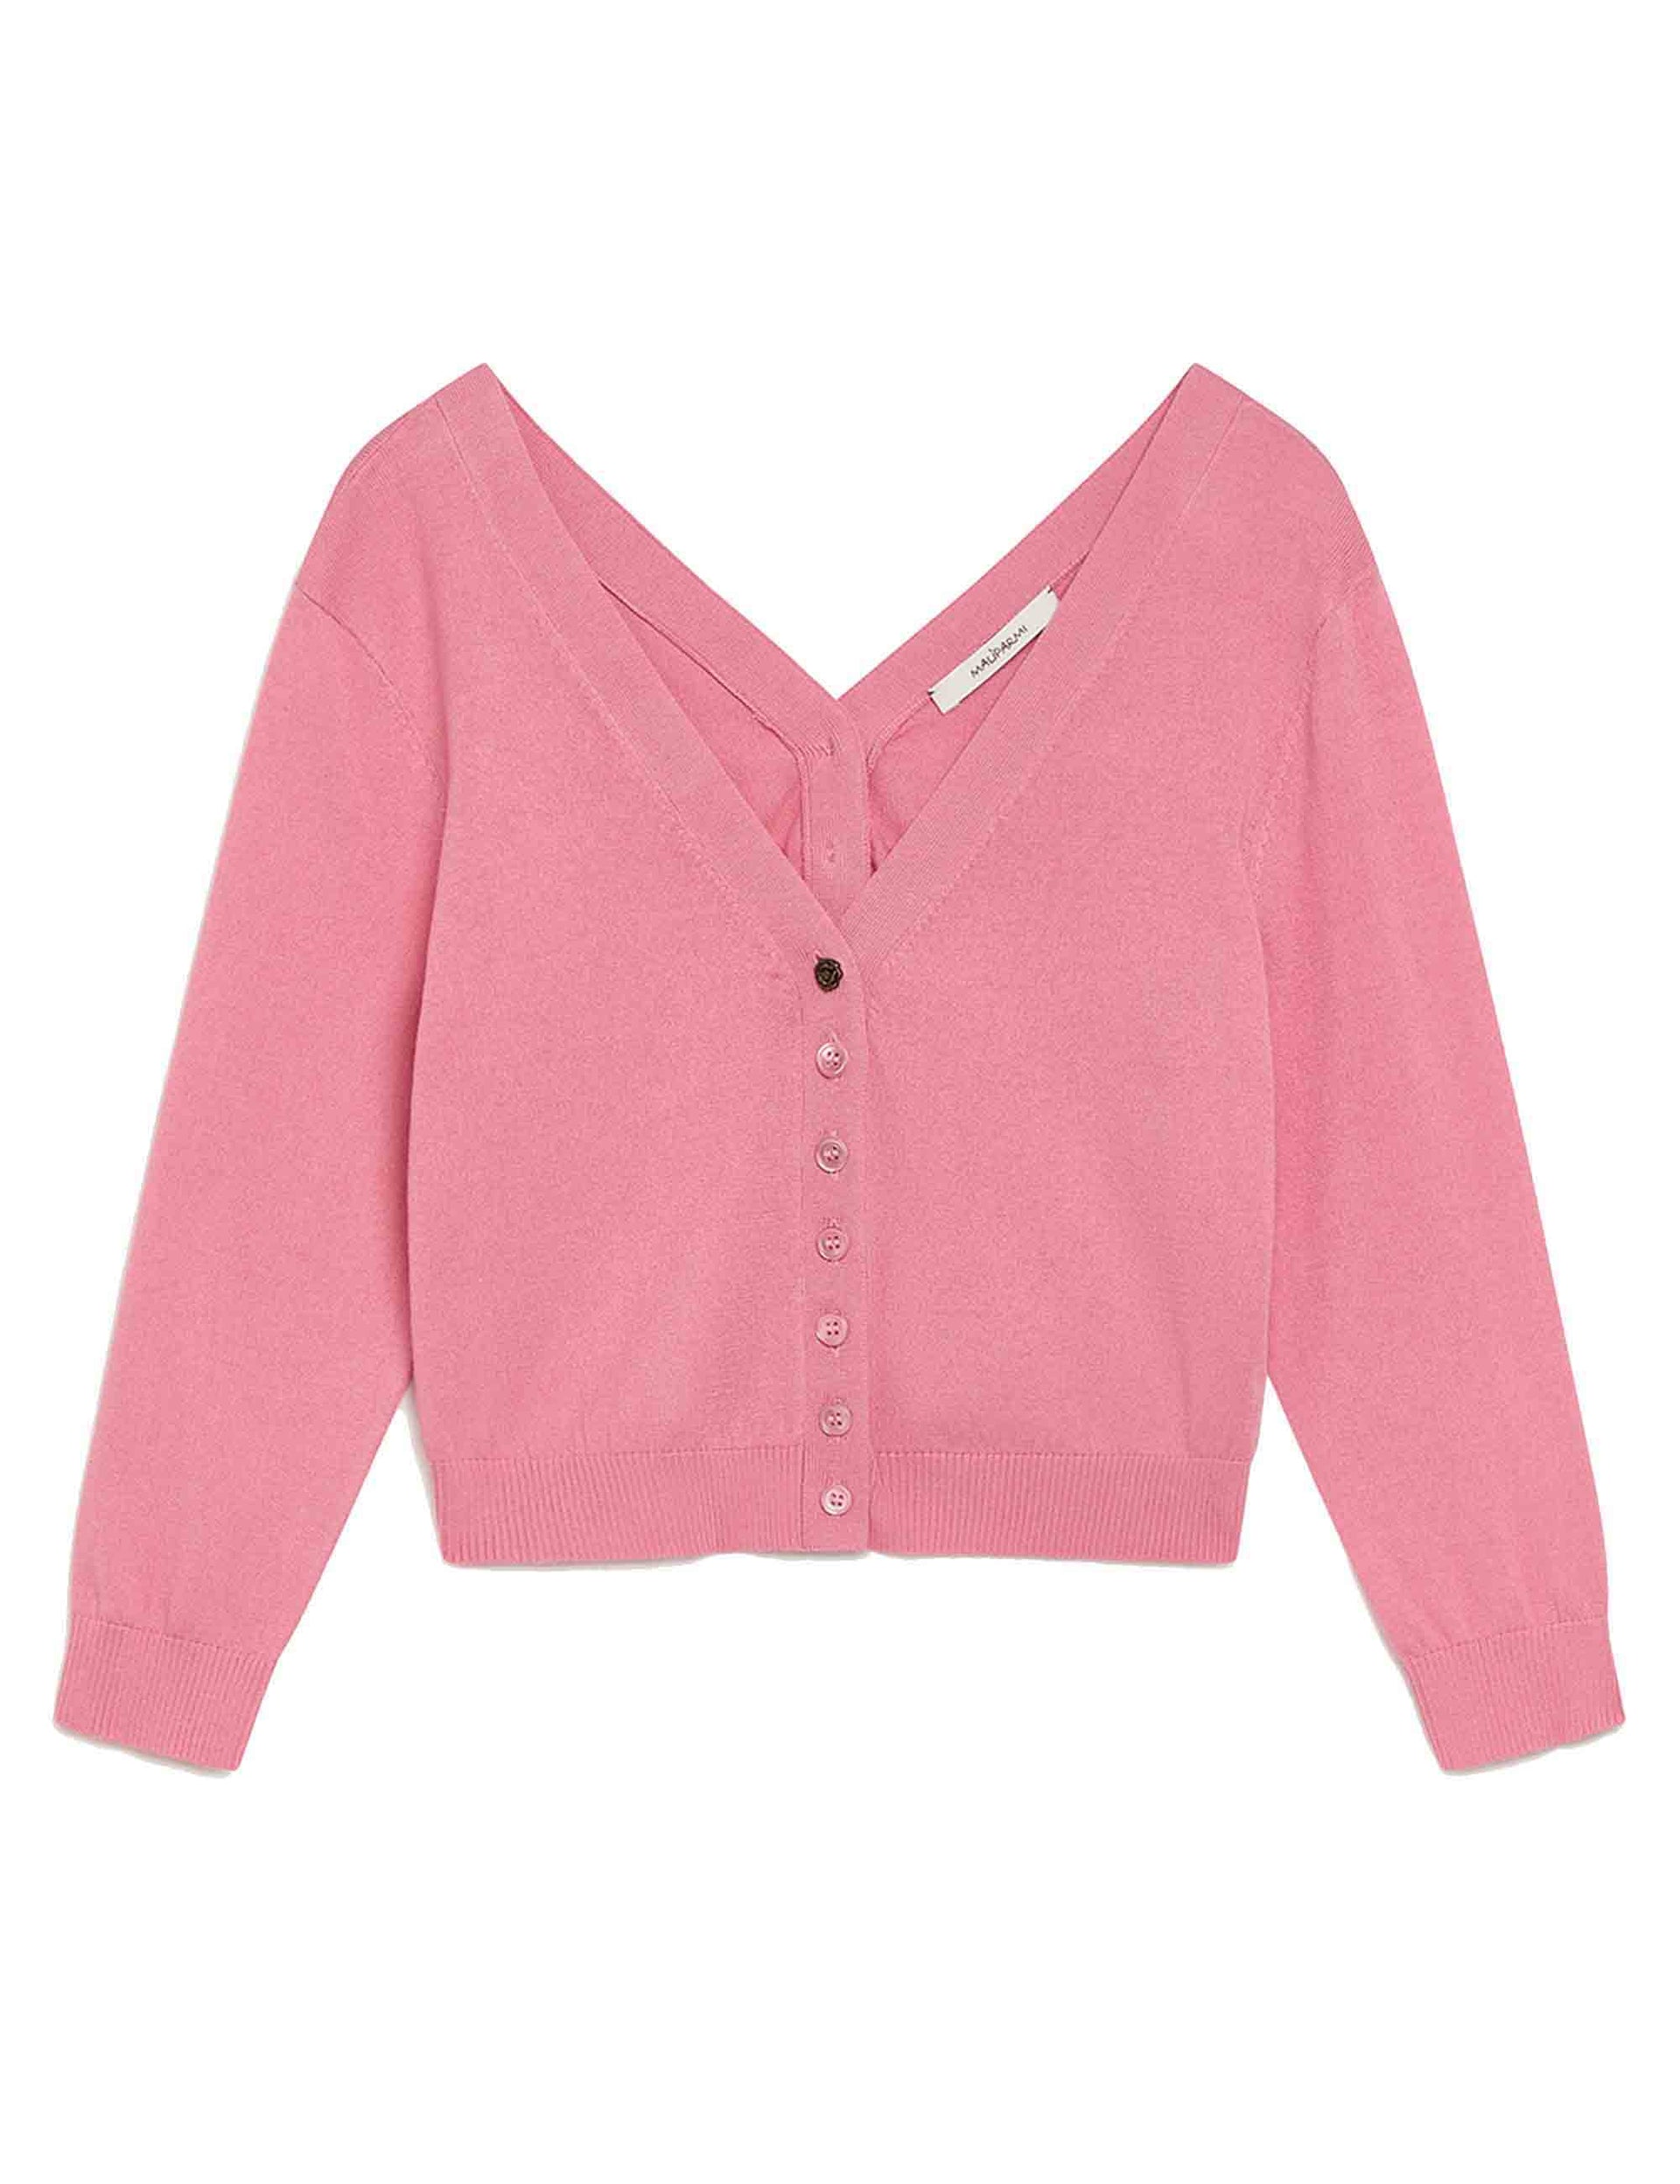 Smooth women's cardigan sweaters in pink cotton